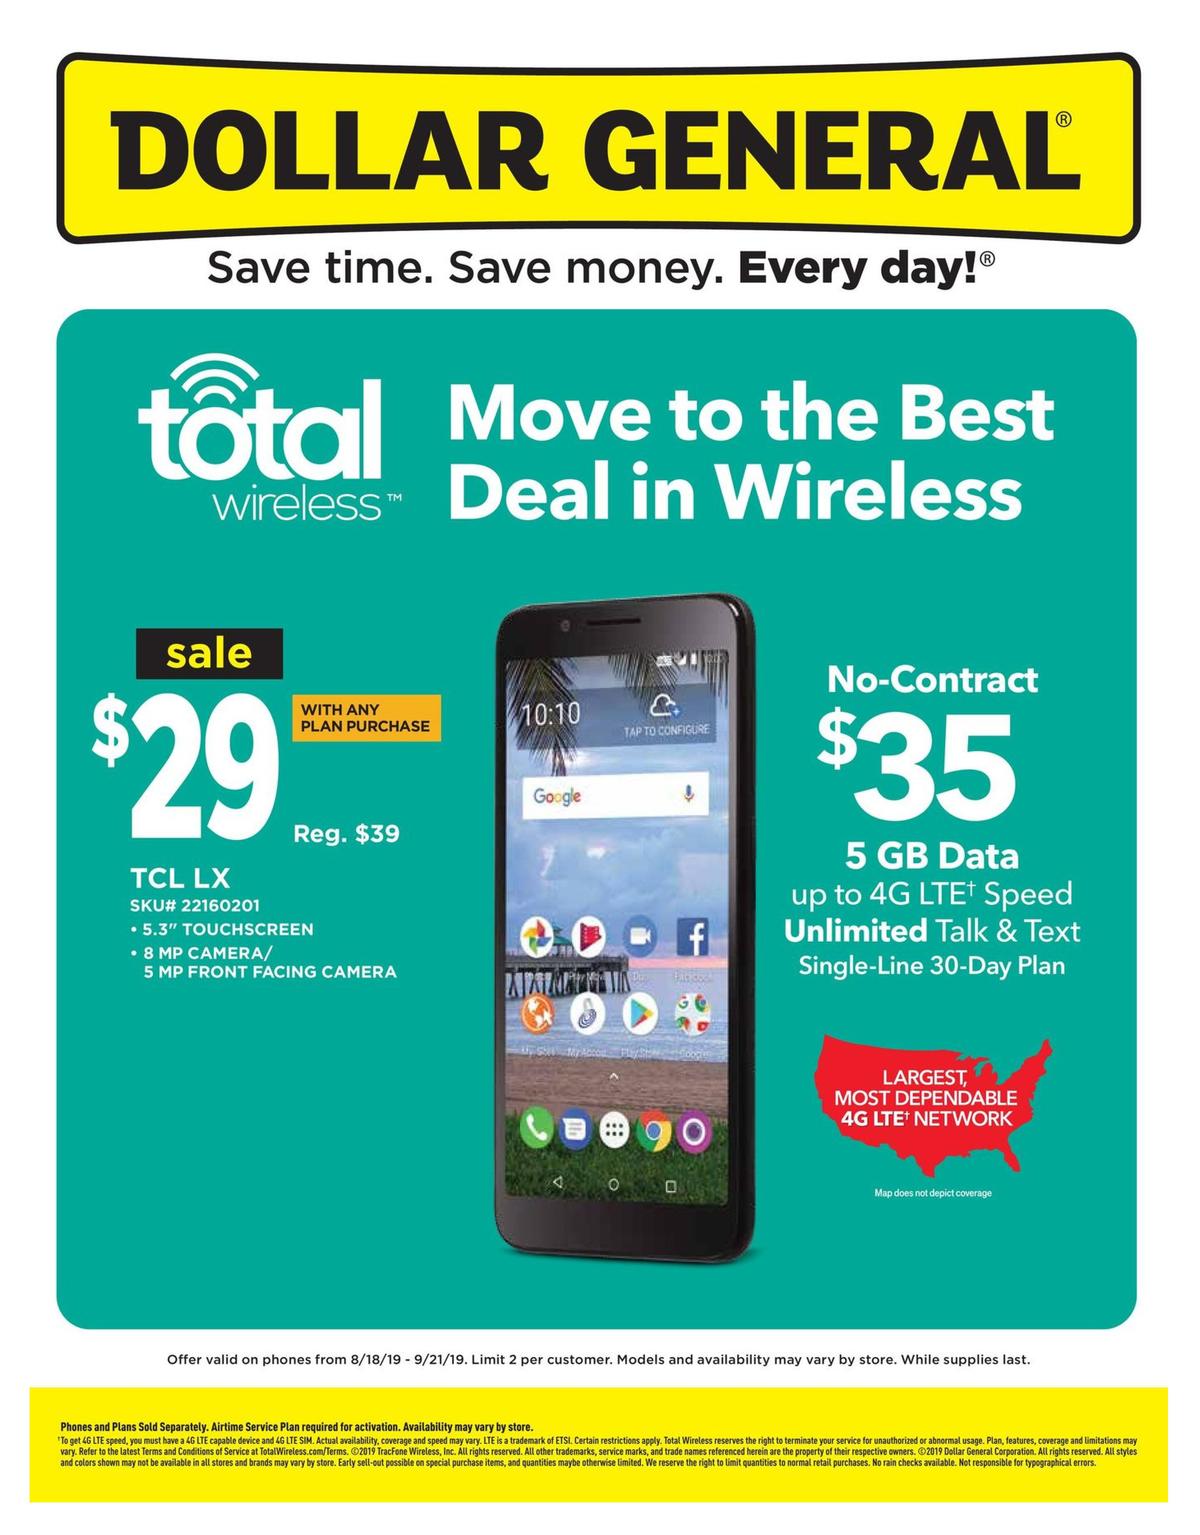 Dollar General Weekly Wireless Specials Weekly Ad from August 18